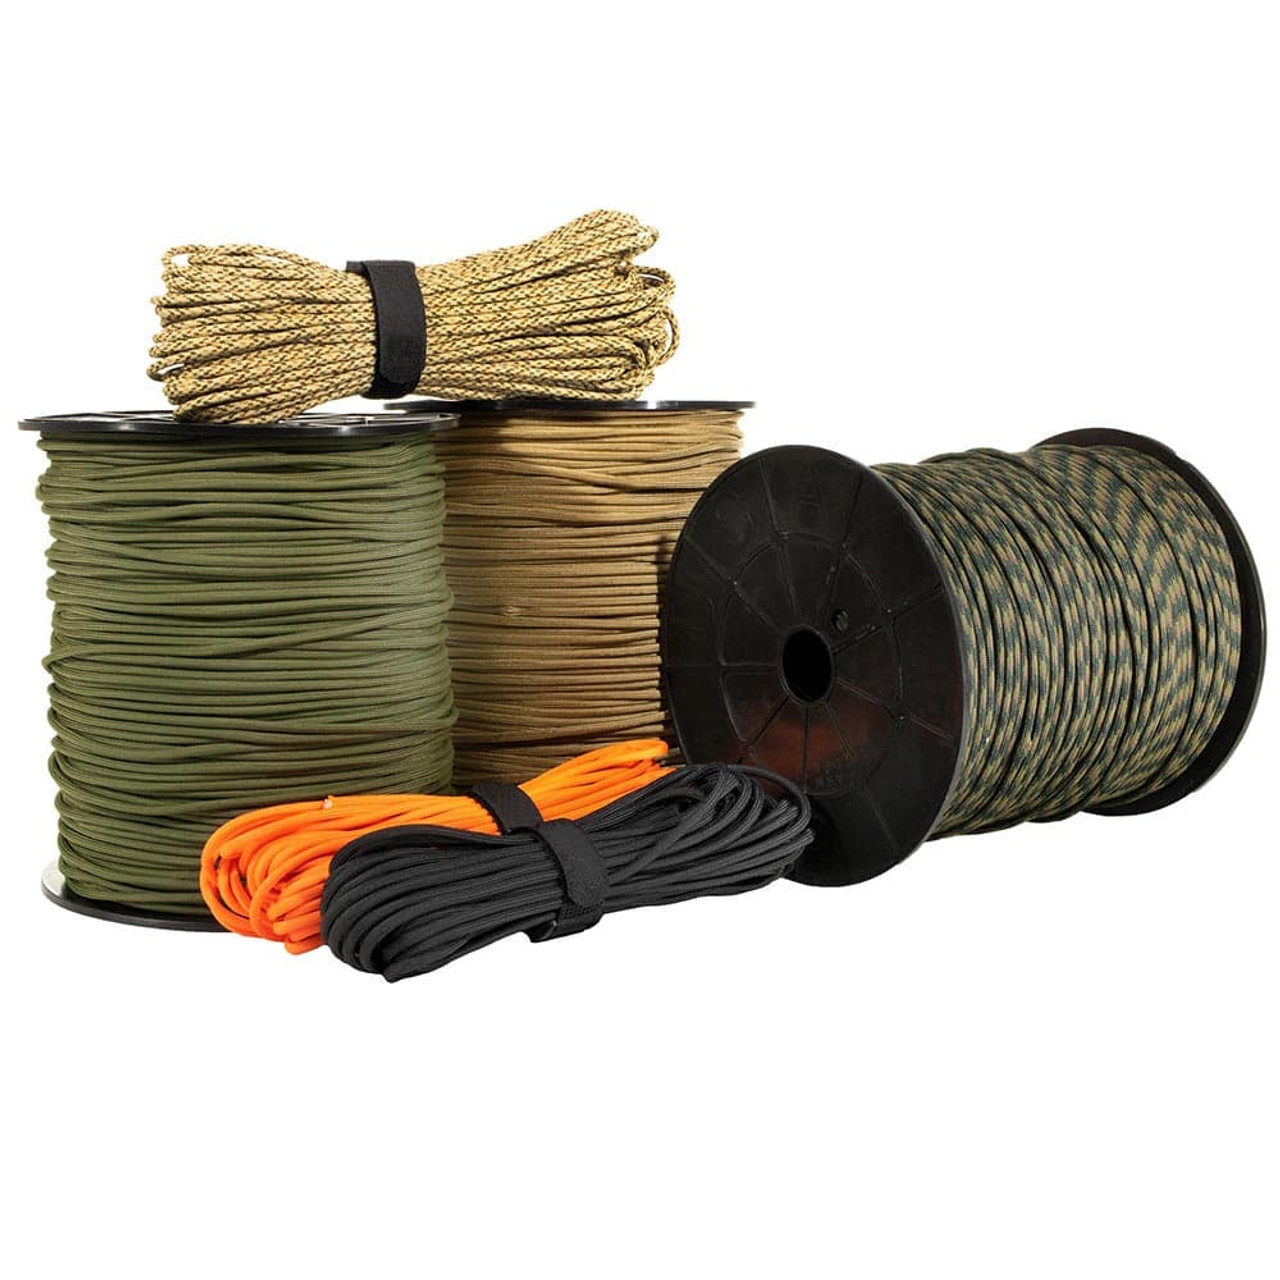 Survival Hiking and Wilderness Adventures Utility Cord for Camping PARACORD PLANET 325 Paracord and Carabiner 50 Feet 